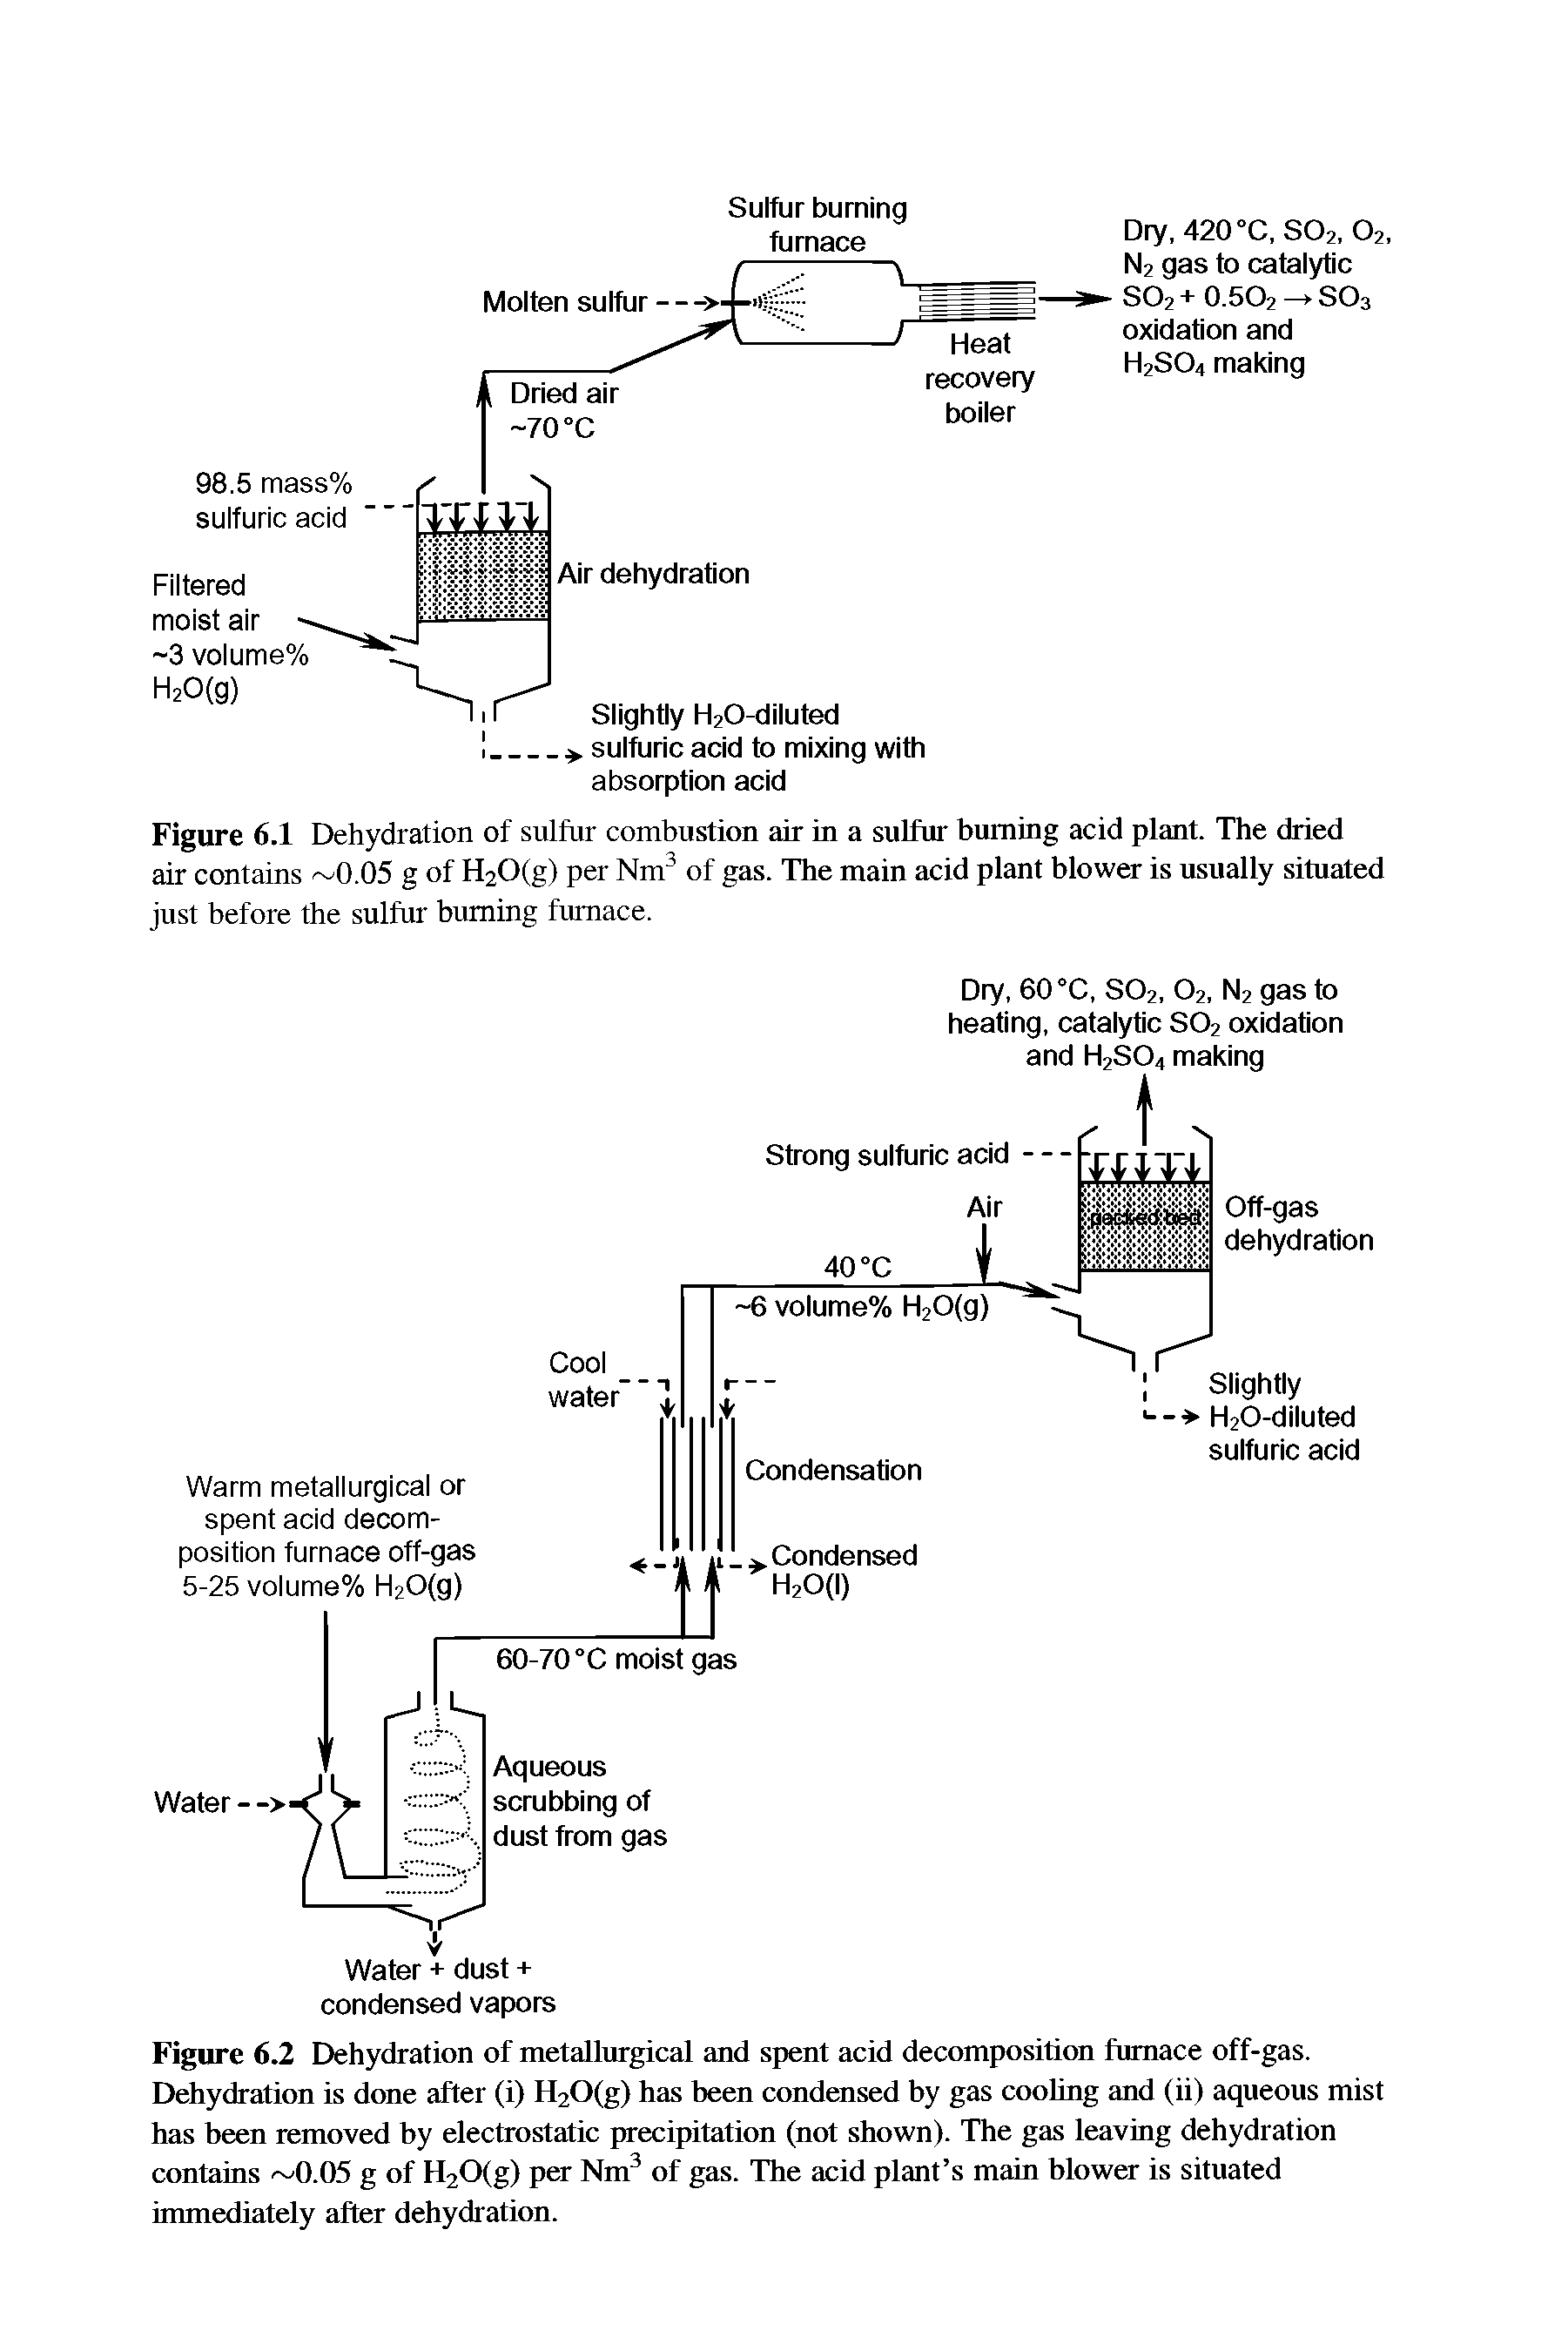 Figure 6.1 Etehydration of sulfur combustion air in a sulfur burning acid plant. The dried air contains 0.05 g of H20(g) per Nm of gas. The main acid plant blower is usually situated just before the sulfiir burning furnace.